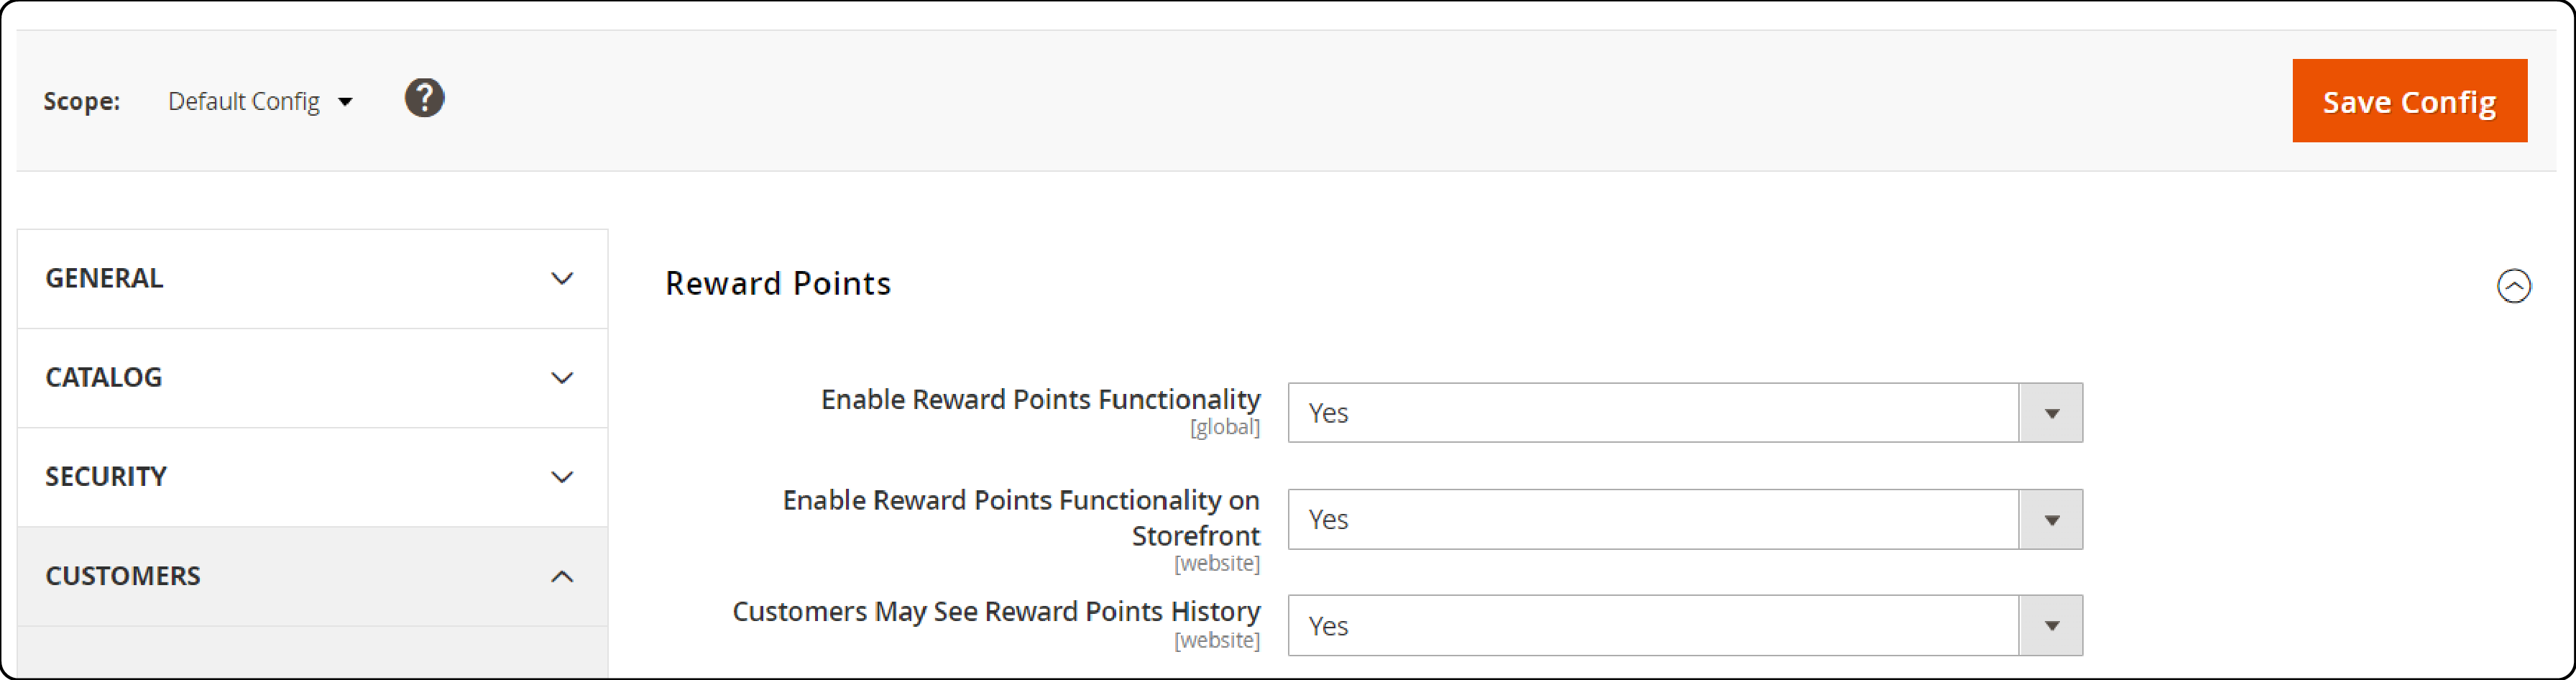 Step-by-step guide on enabling reward points feature in Adobe Commerce